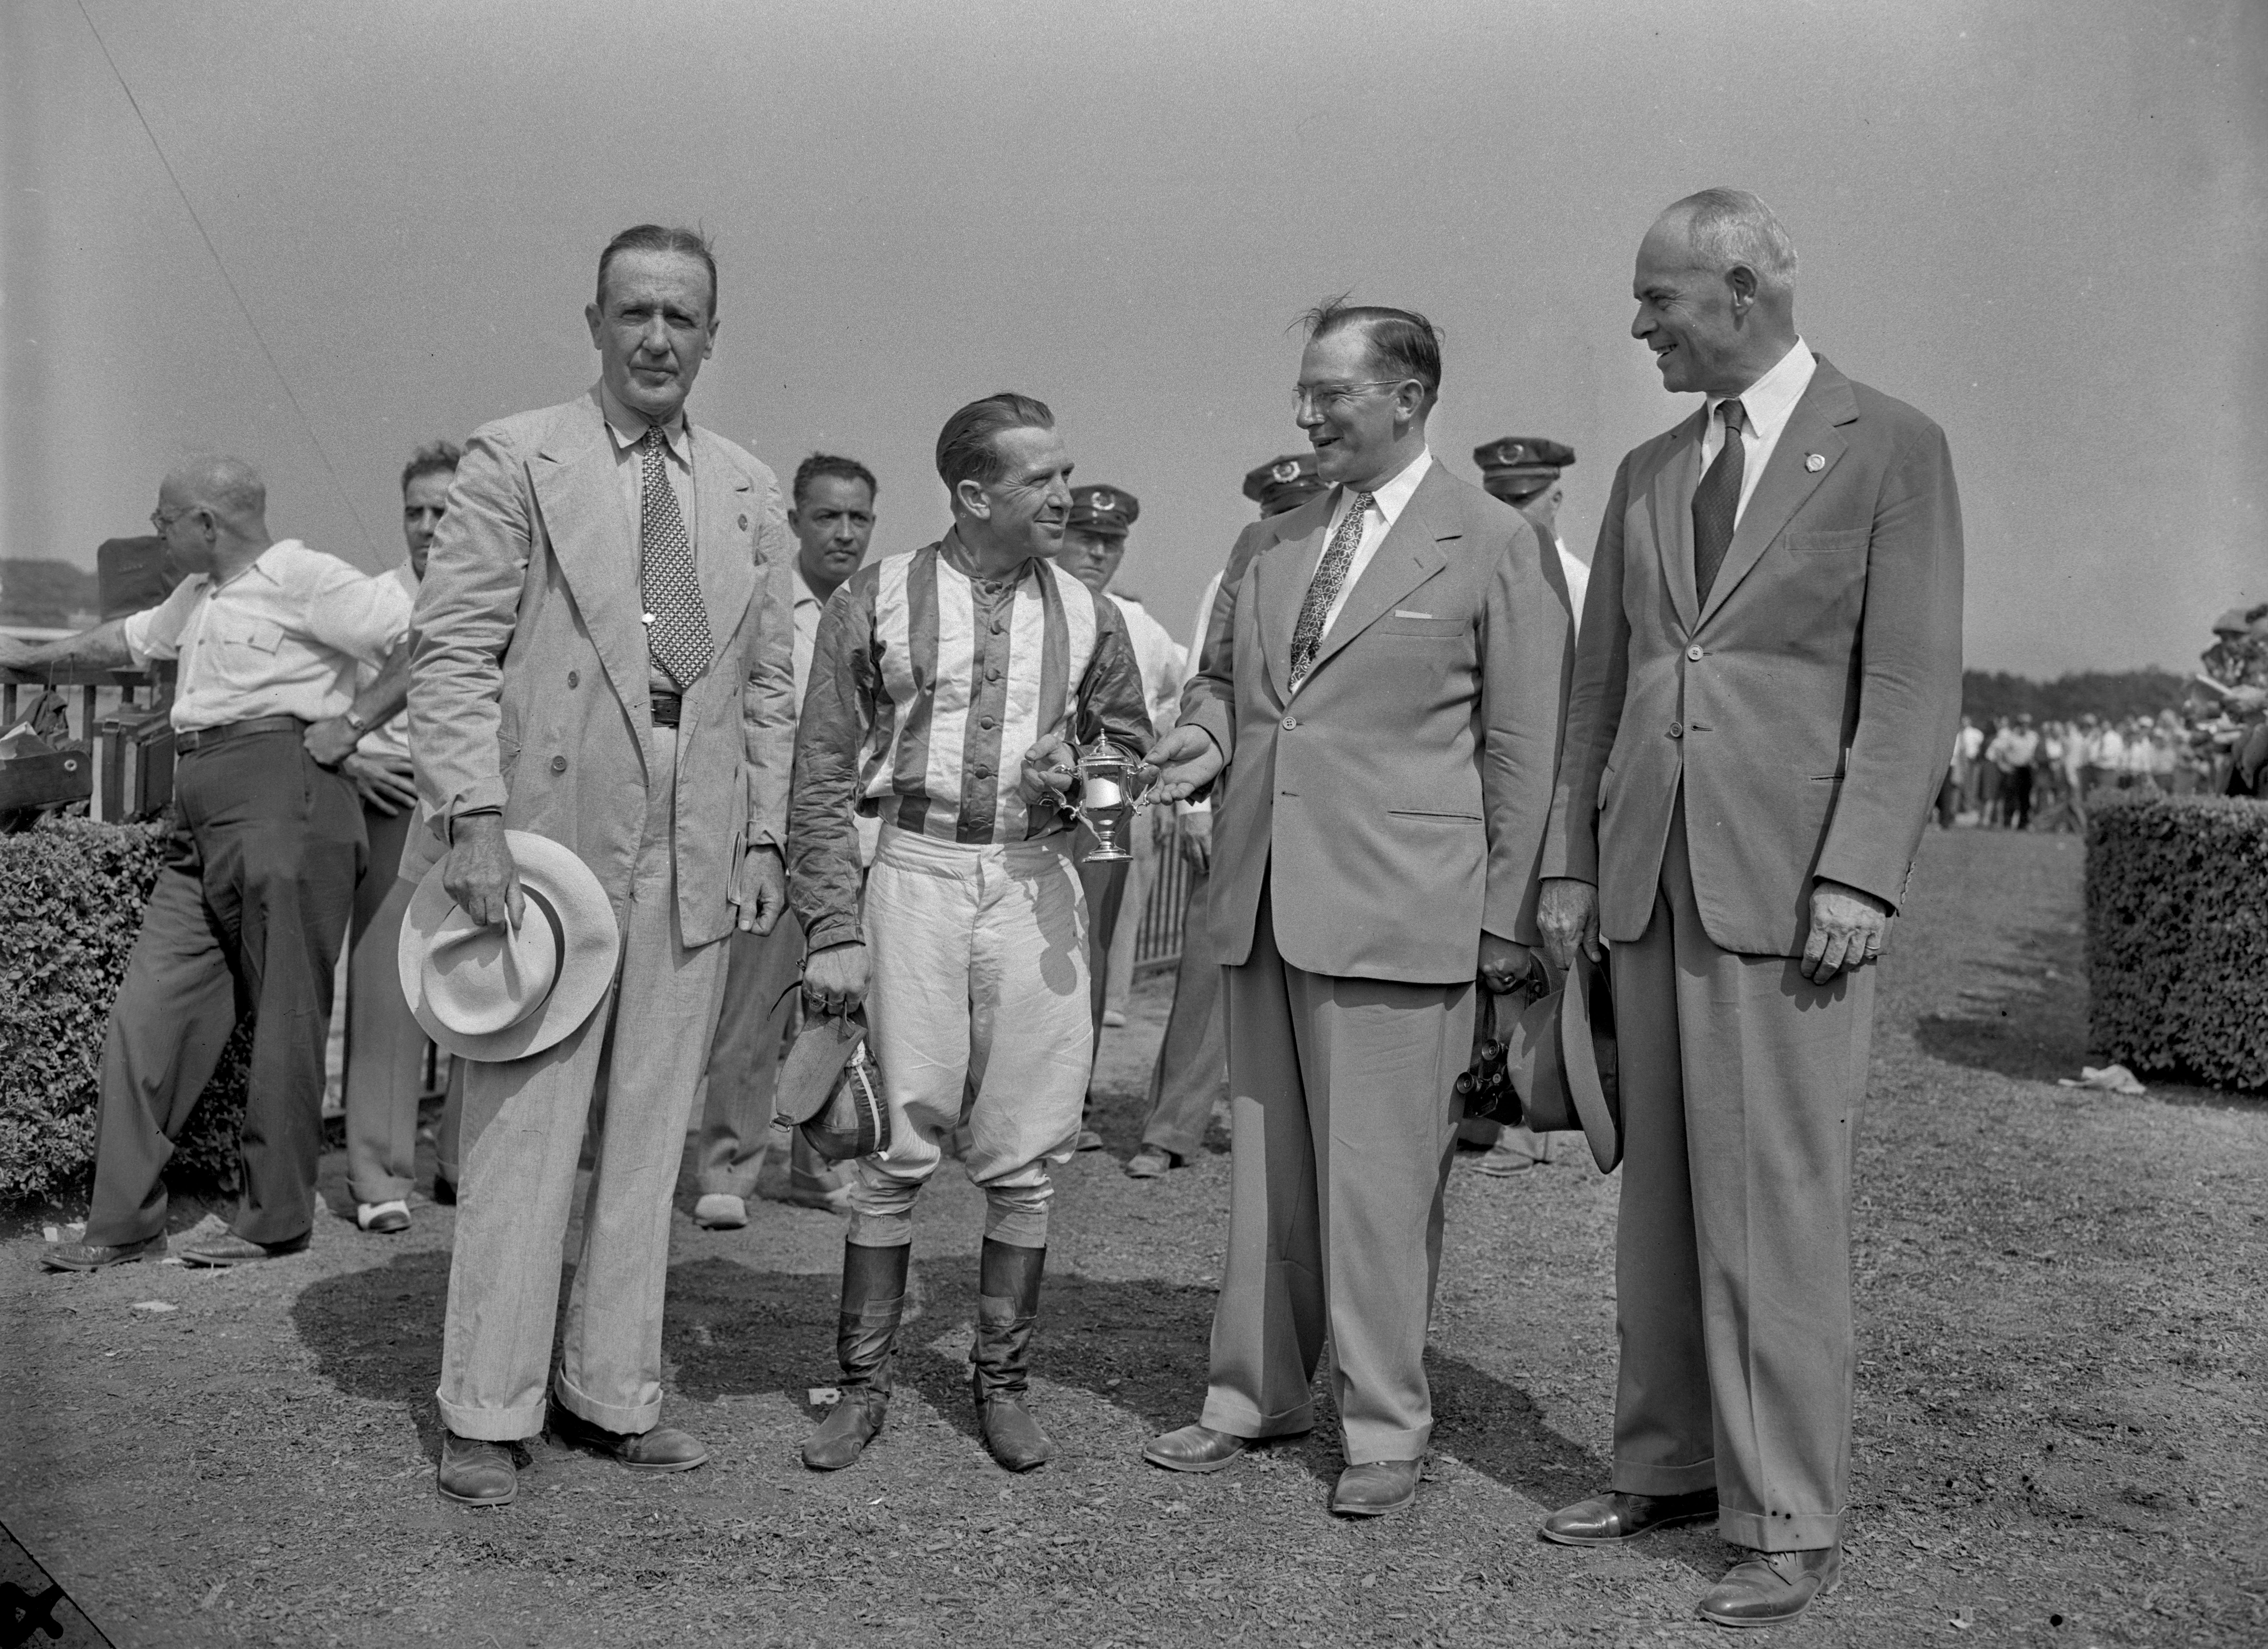 Winner's circle presentation for the 1944 Saratoga Special featuring, from left, F. S. von Stade, George Woolf, Oscar White, and Walter Jeffords, Sr. (Bert Morgan/Museum Collection)